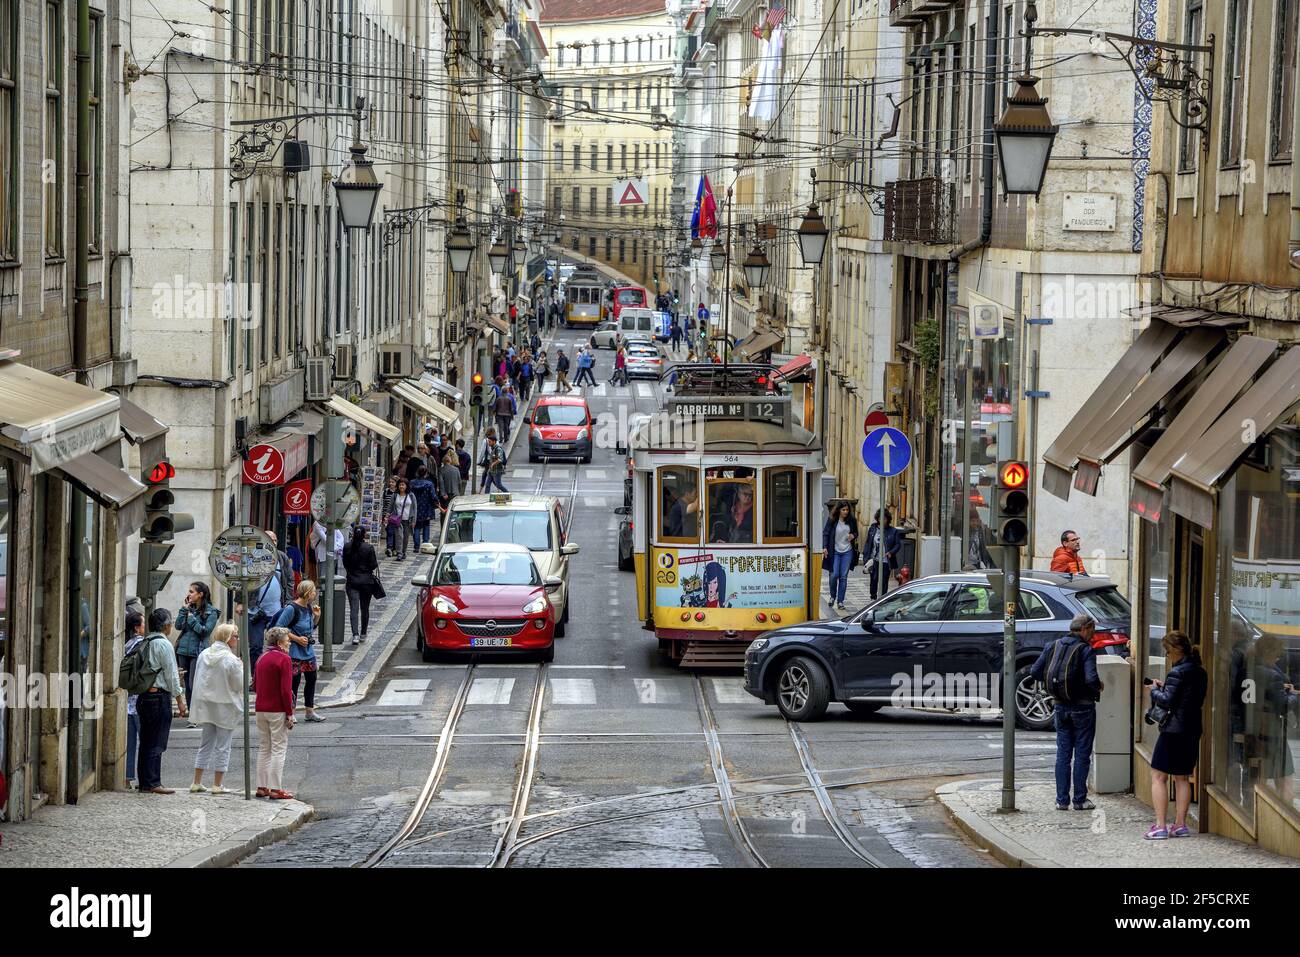 geography / travel, Portugal, street scene with tram, Lisboa, Additional-Rights-Clearance-Info-Not-Available Stock Photo